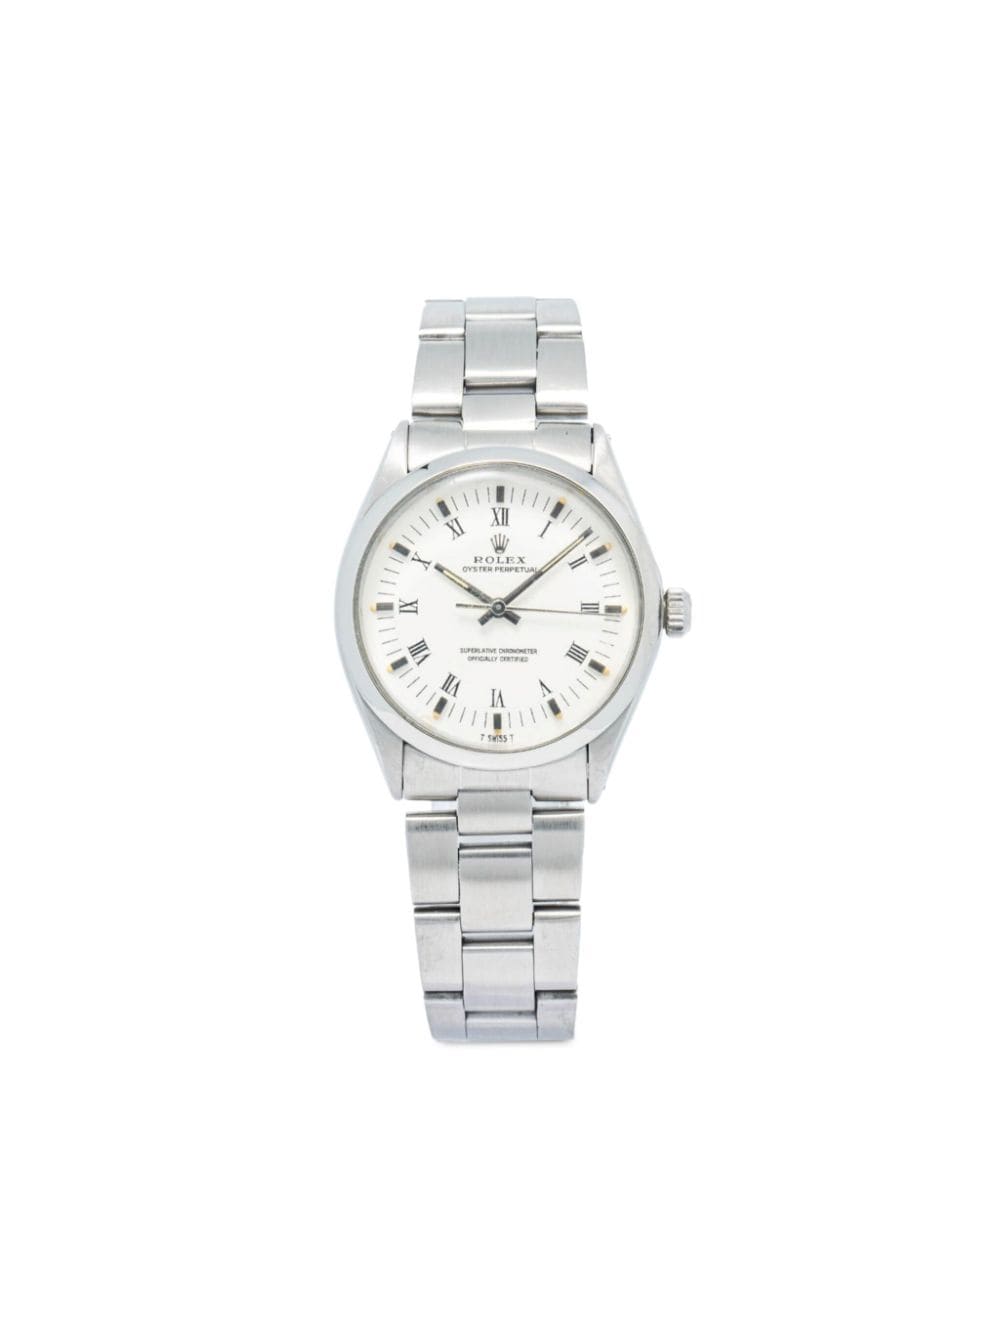 Rolex pre-owned Oyster Perpetual 34mm - White von Rolex